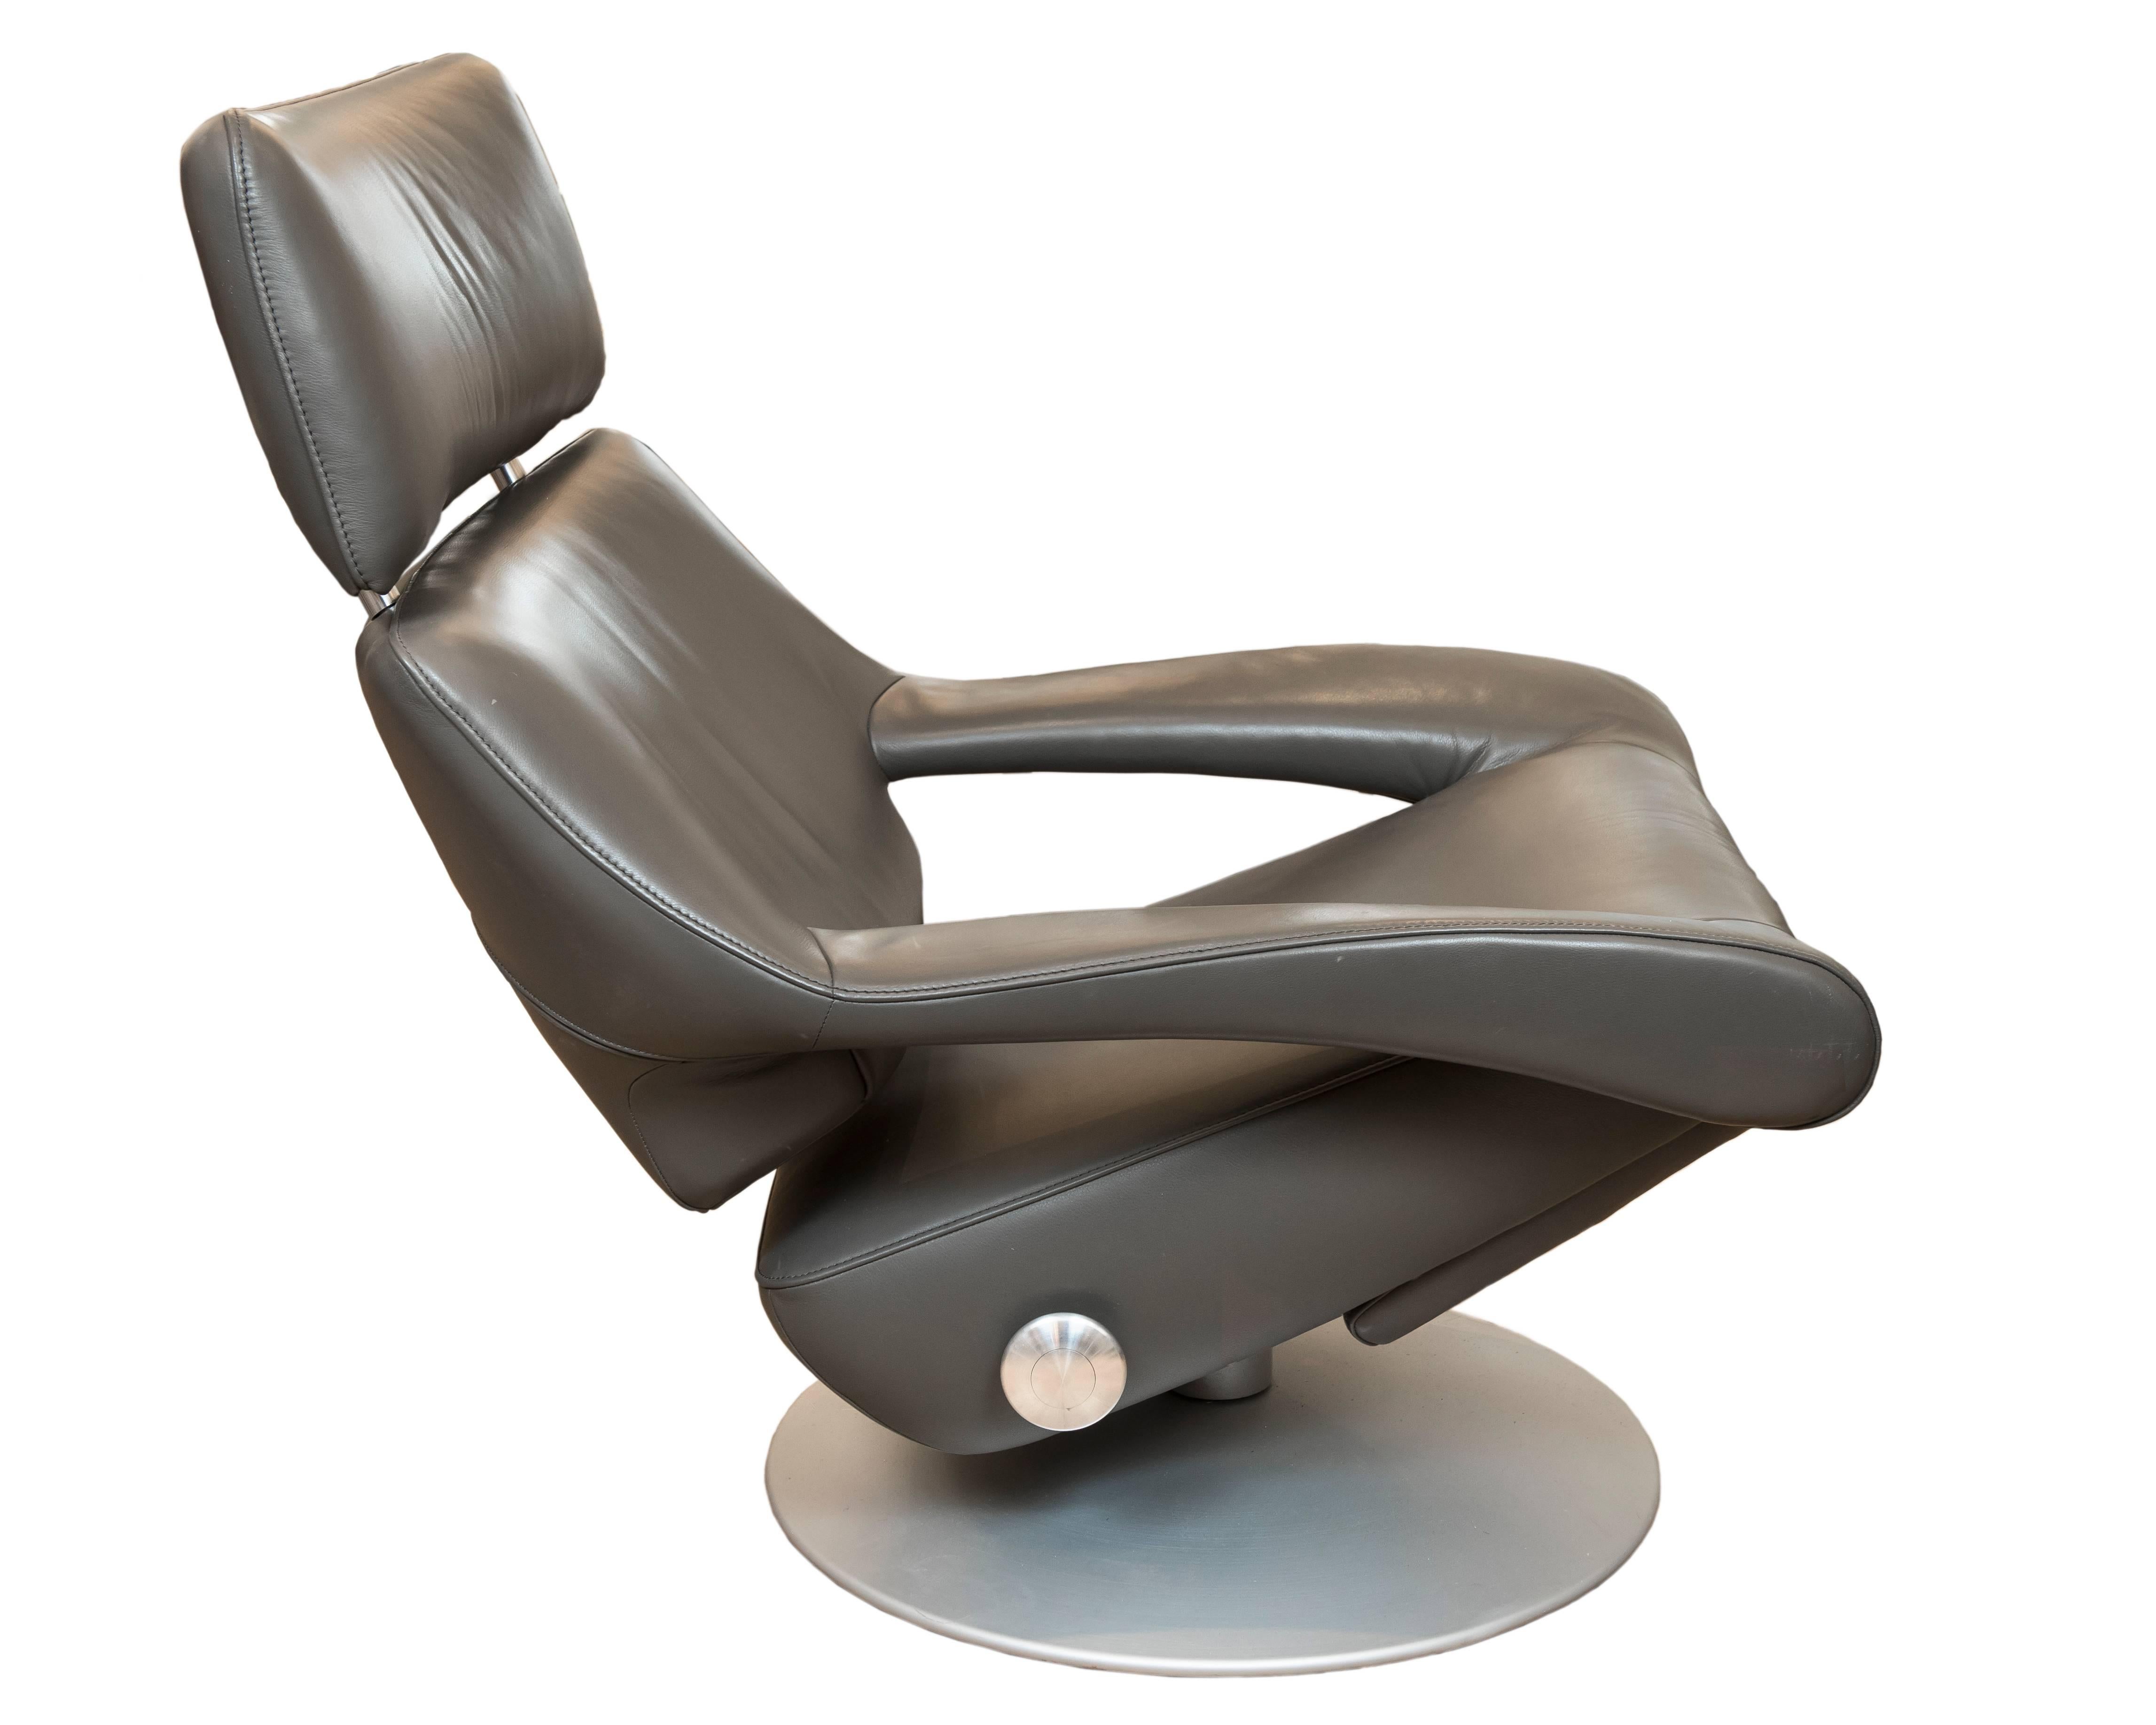 This wonderfully comfortable lounge chair in grey leather by premium furniture maker De Sede of Switzerland has a full 360 swivel, a two level hideaway foot stool, a side locking mechanism to adjust the tilt and is in excellent vintage